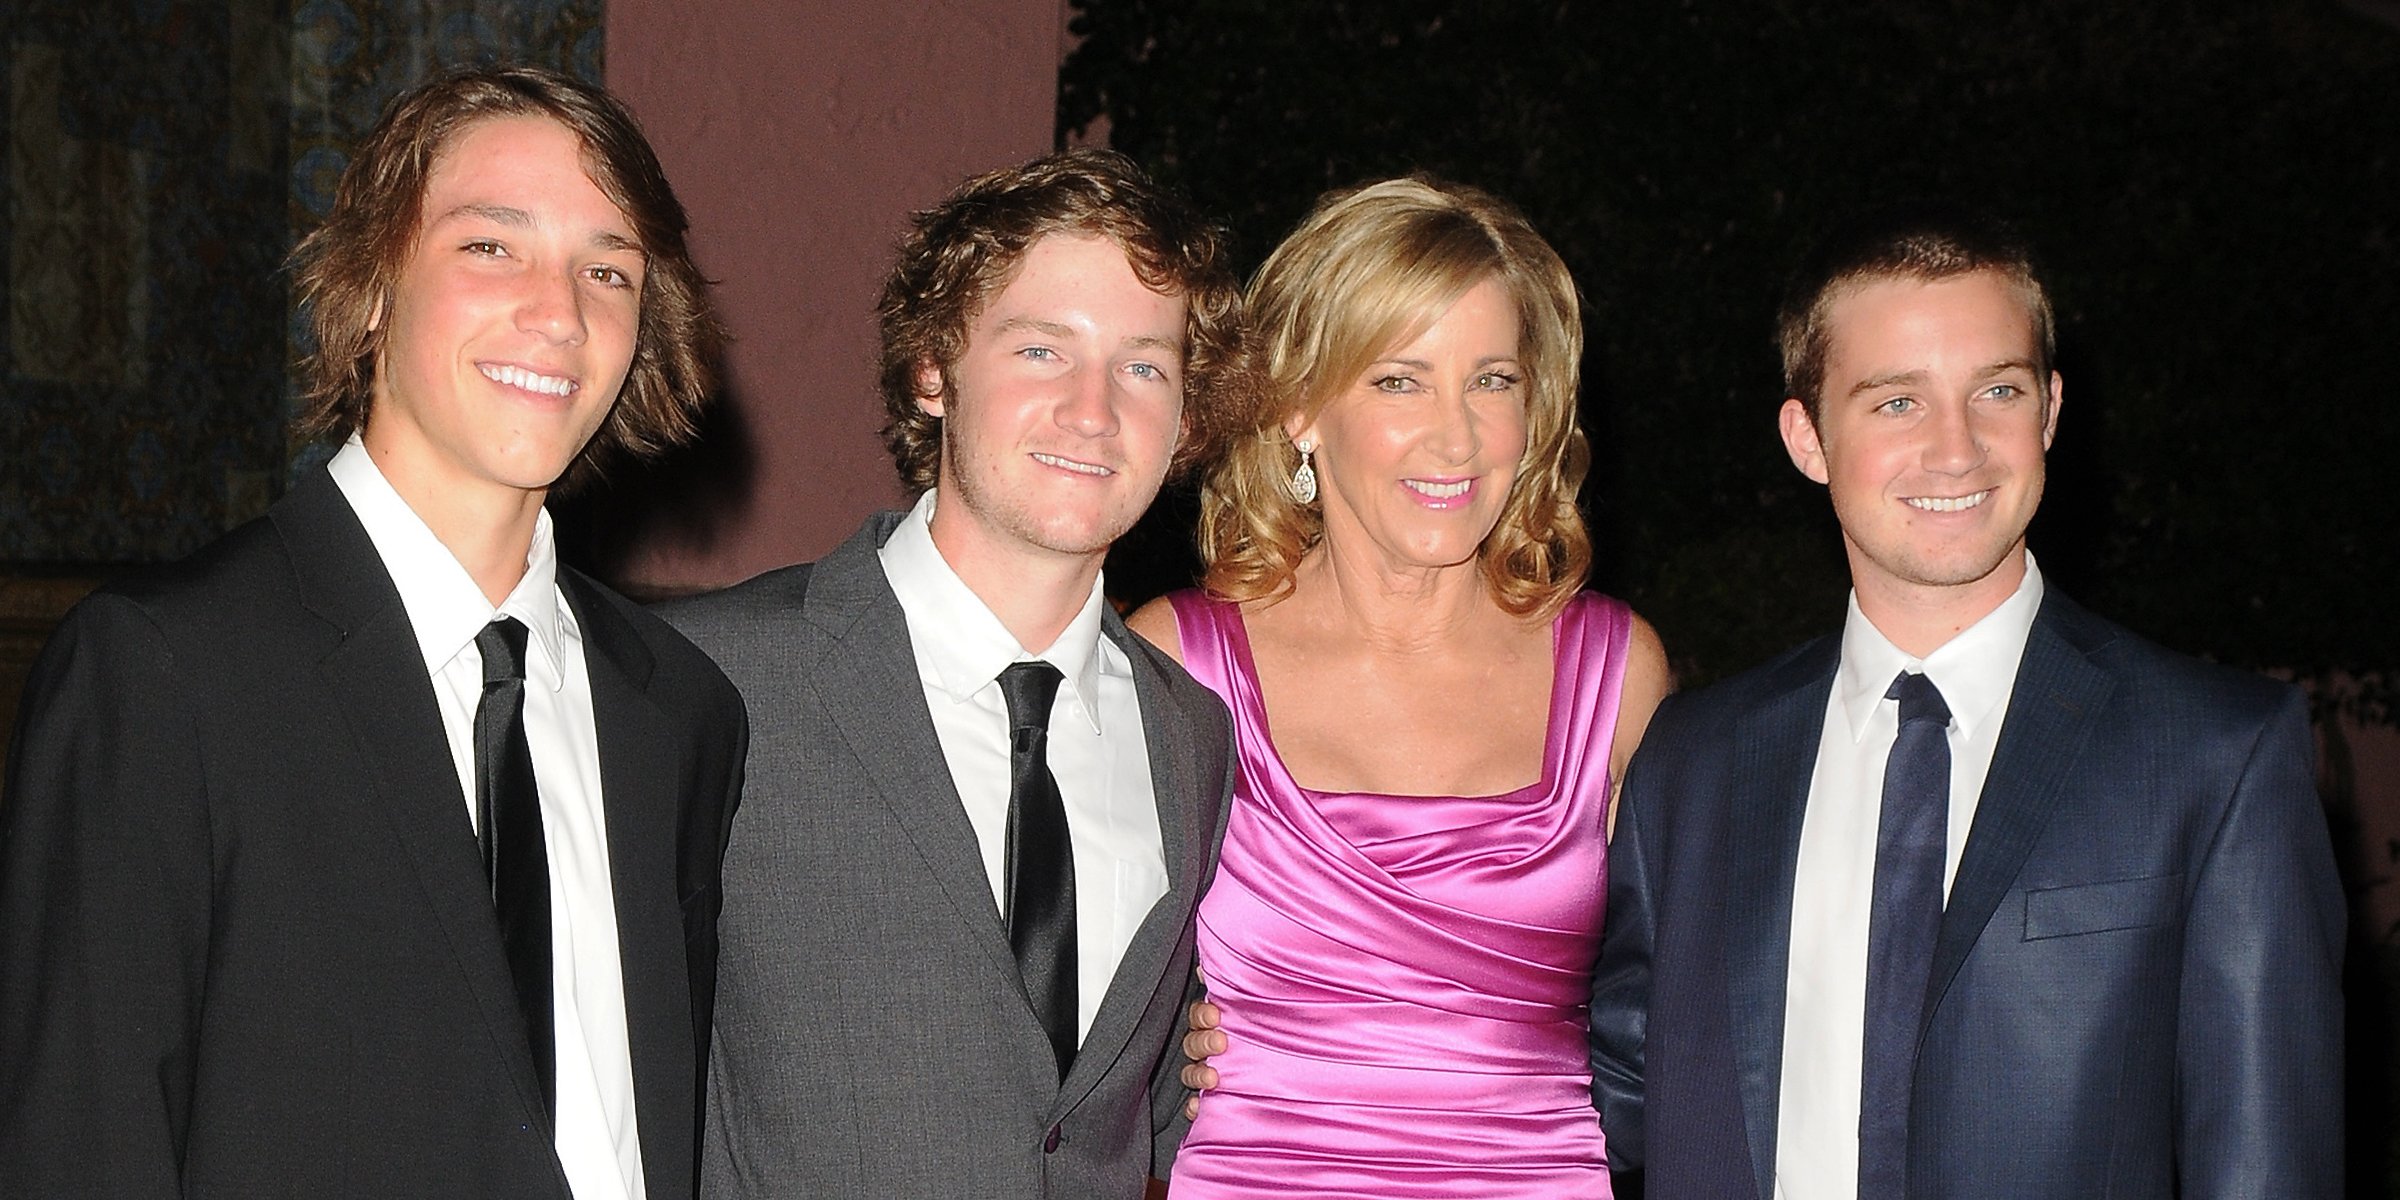 Chris Evert and her sons, 2012 | Source: Getty Images